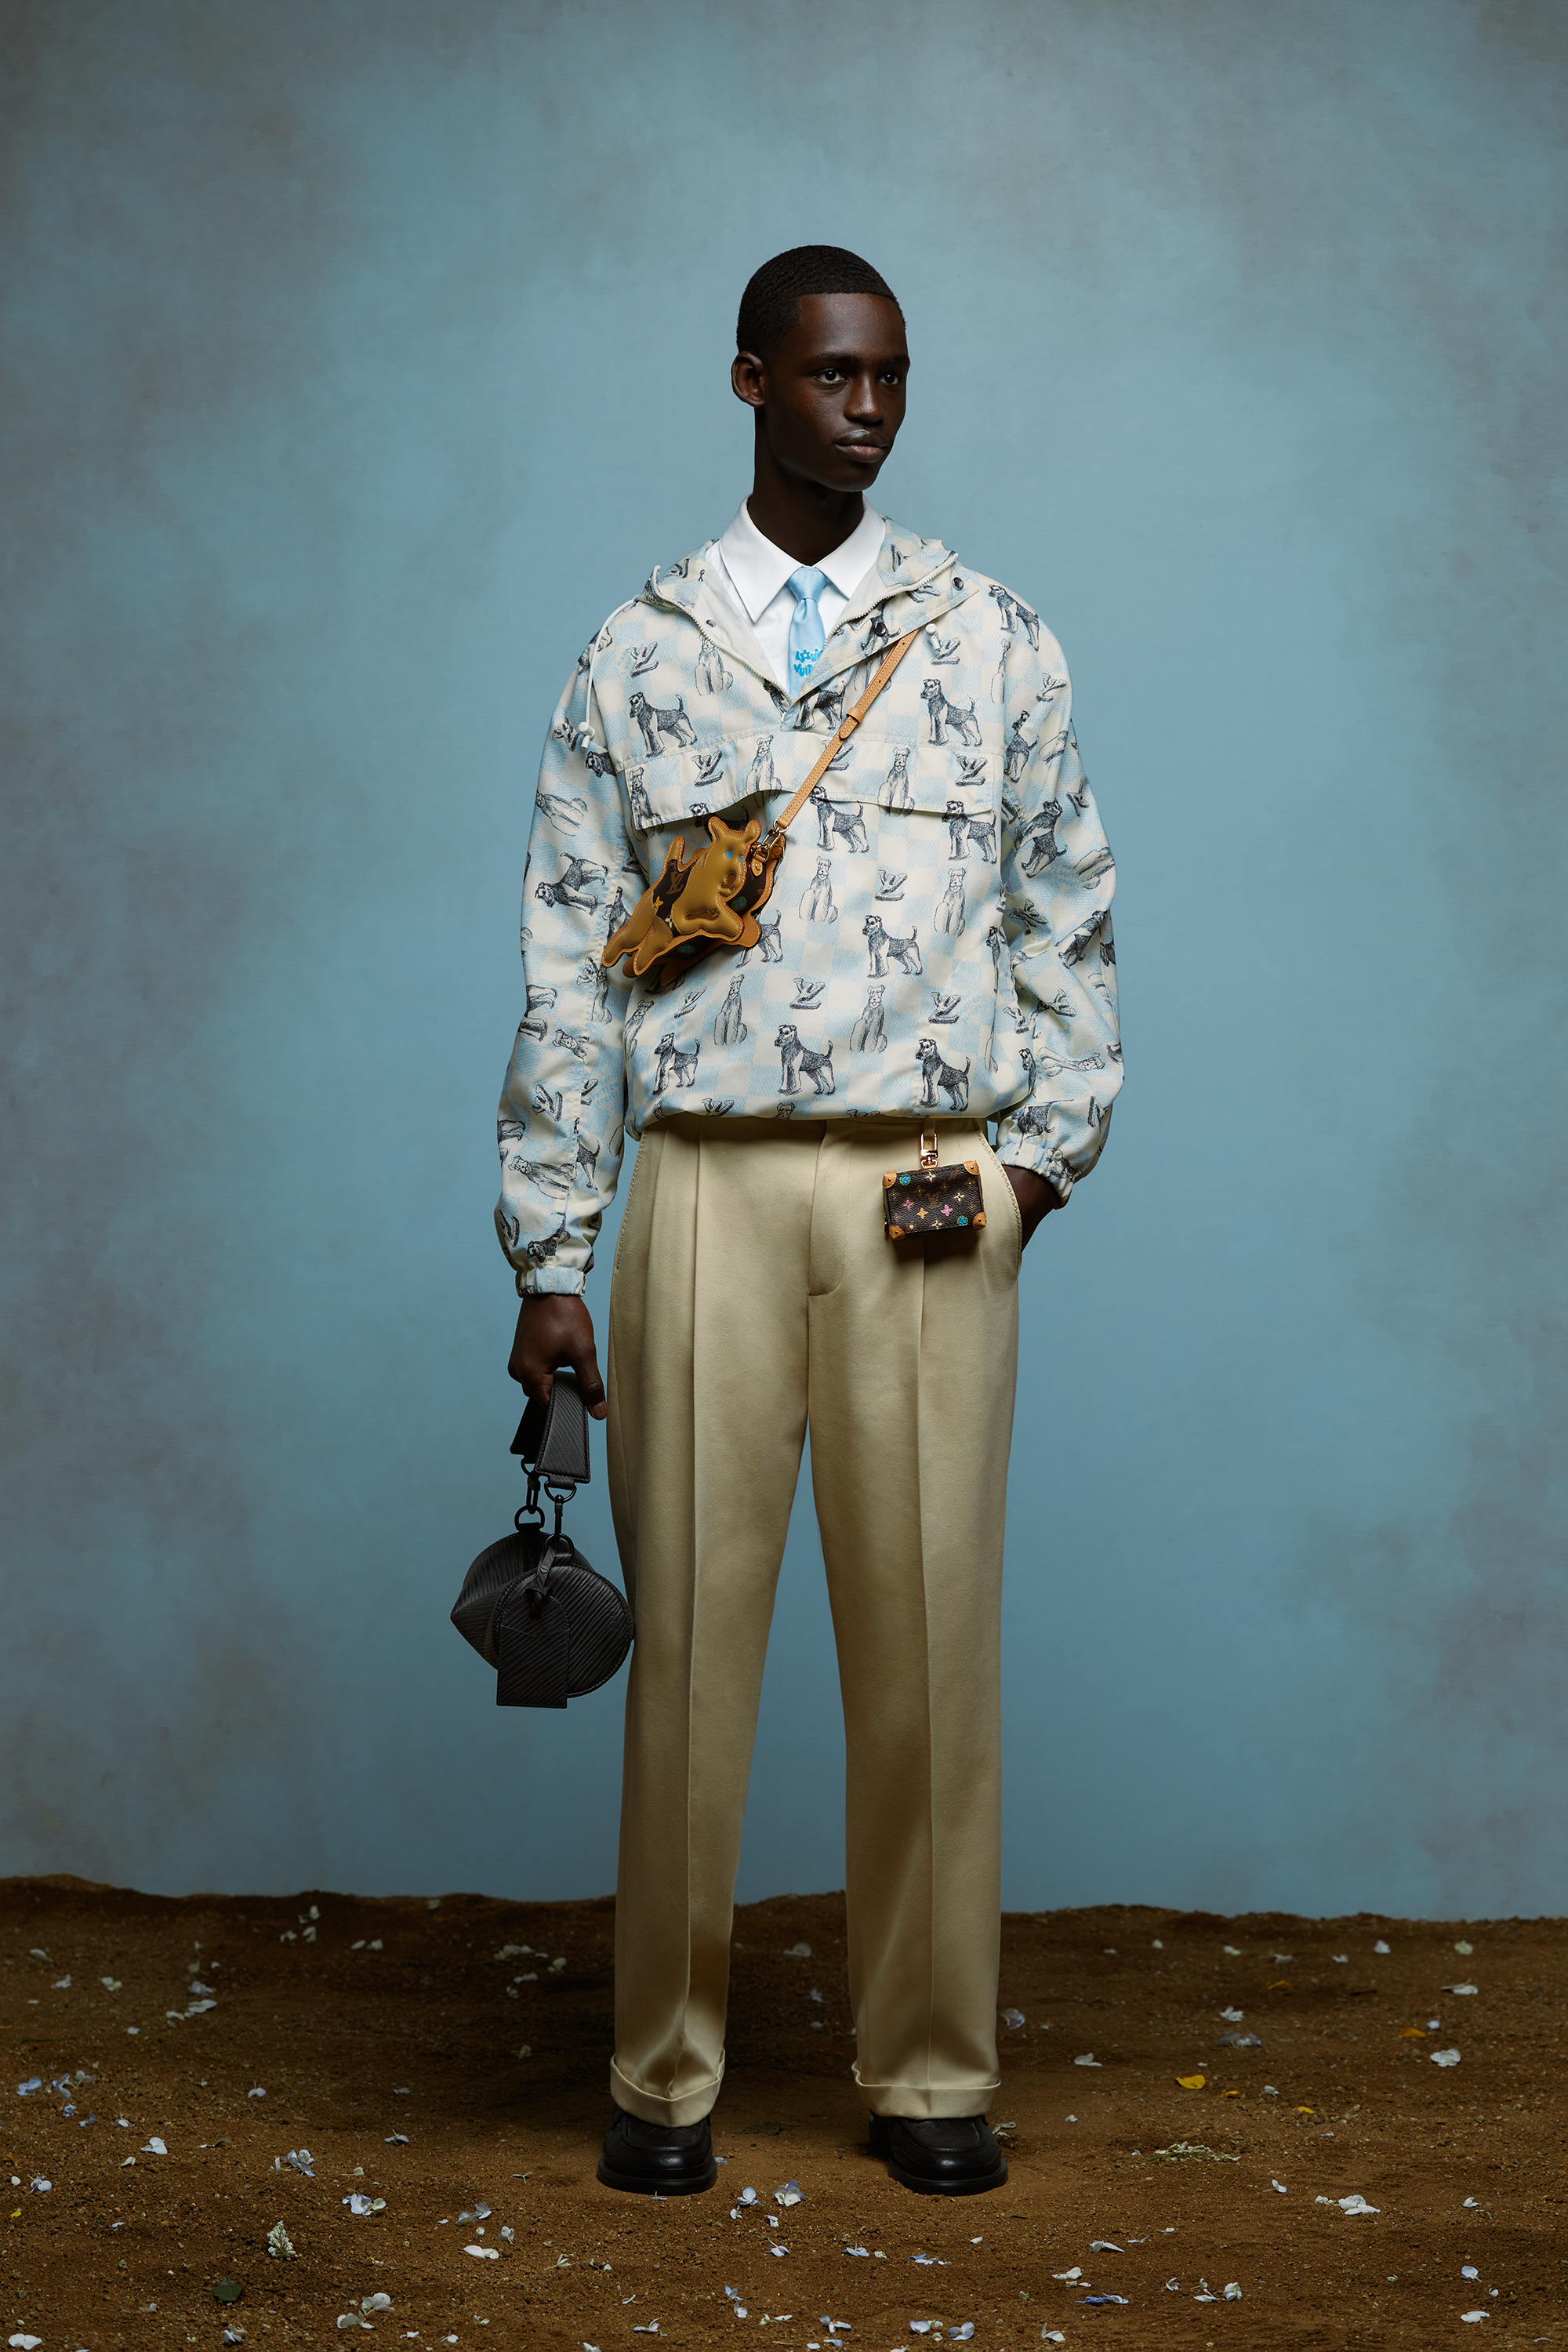 Model in a patterned jacket, layered shirts, beige trousers, and carrying multiple small bags, posing against a blue backdrop